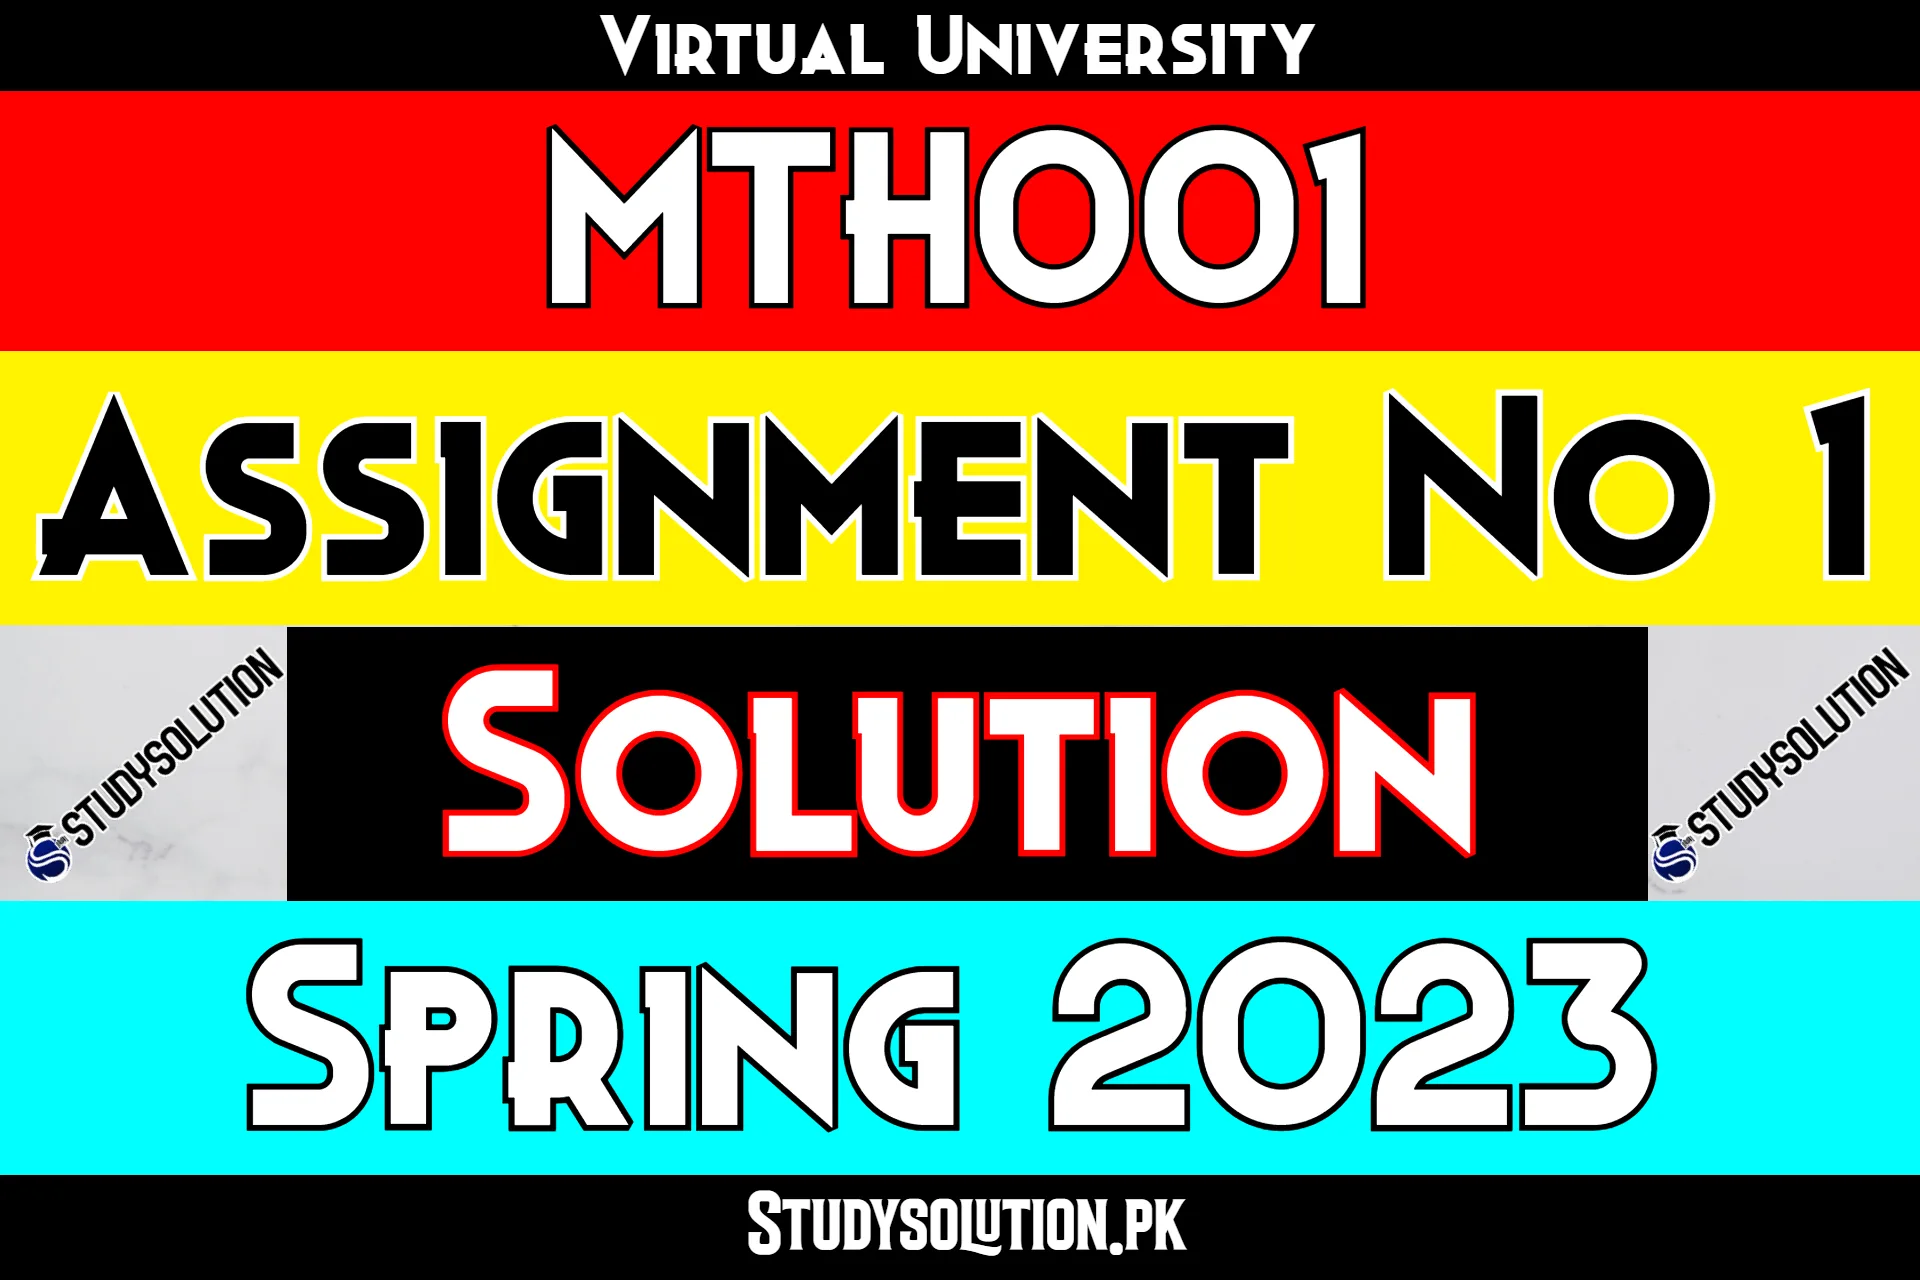 MTH001 Assignment No 1 Solution Spring 2023